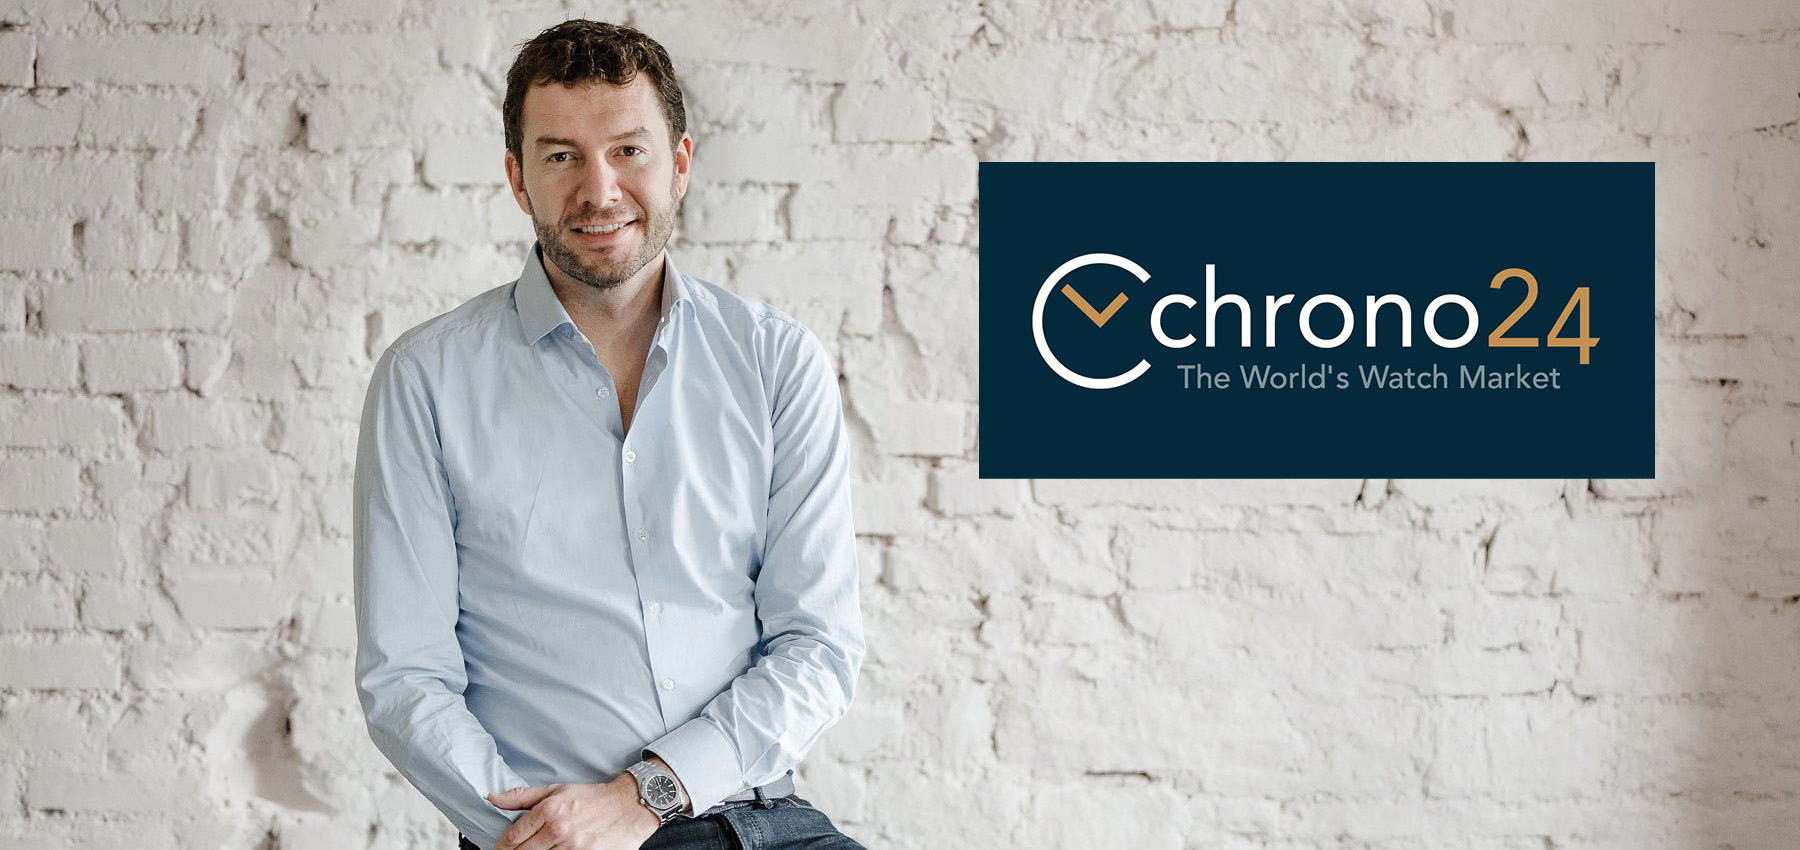 Chrono24 Launches ChronoPulse: The First Luxury Watch Market Index Founded On Real Transaction Data